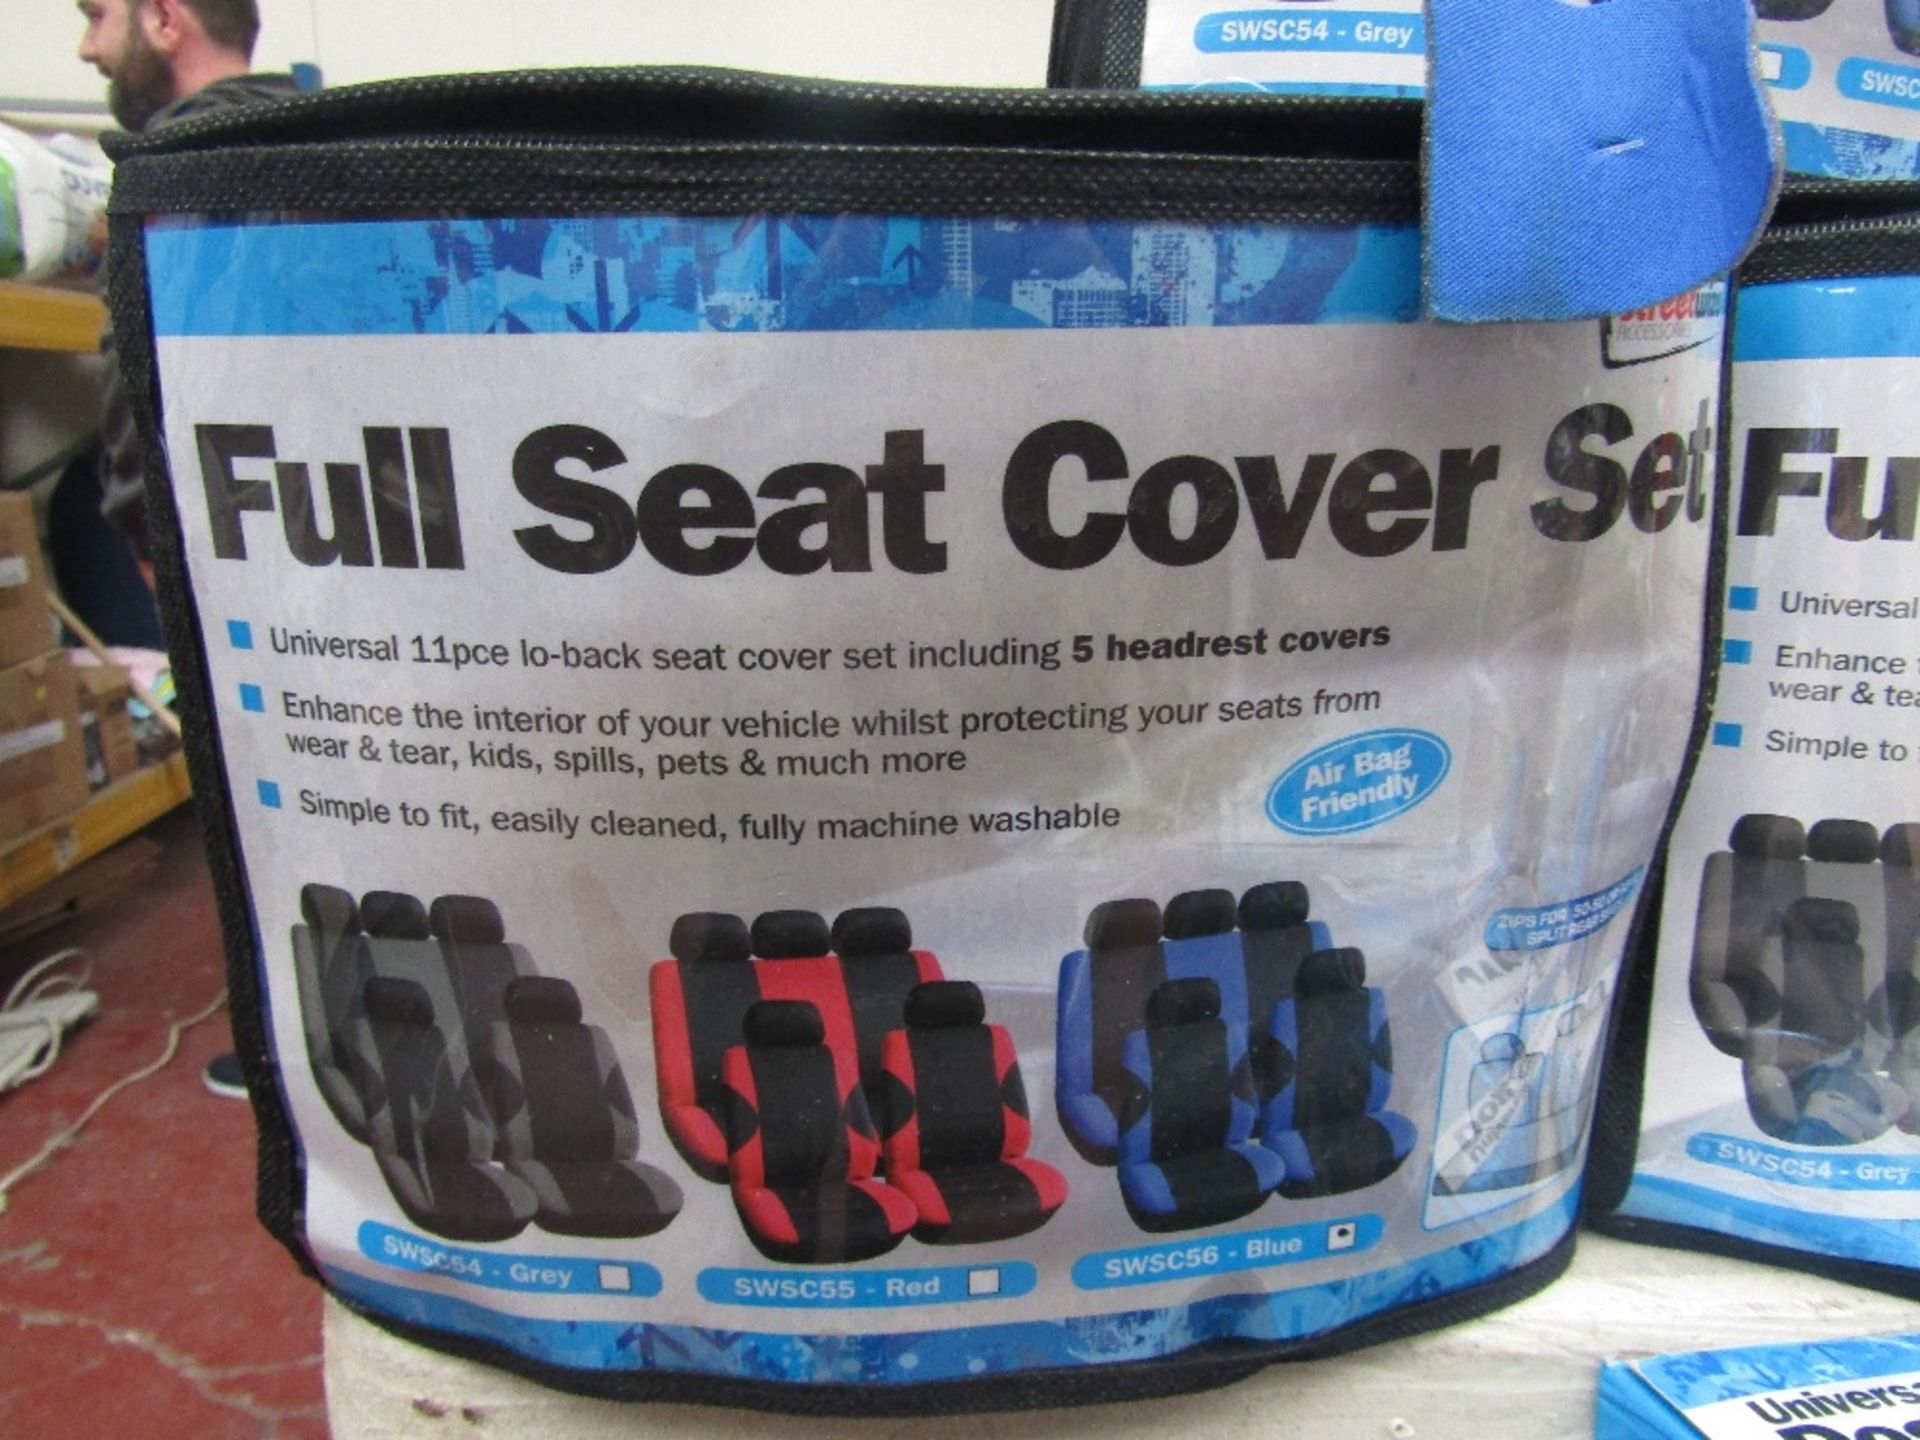 StreetWize Full Seat Cover in Black and Blue. Brand New.